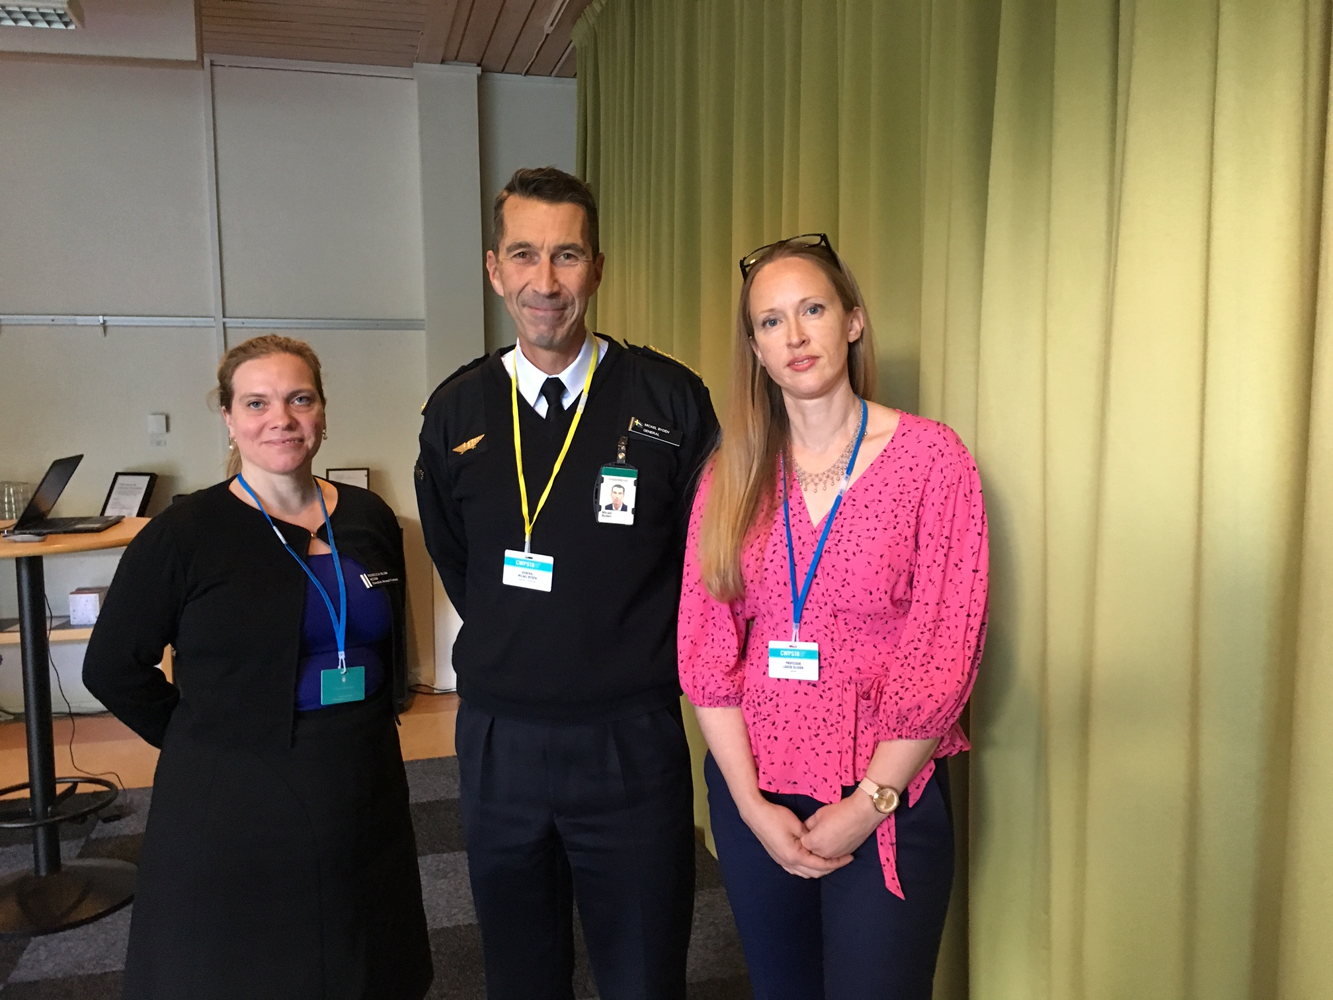 From left to right: Rebecca Blum (Nordic Centre for Gender in Military Operations), General Micael Bydén (Swedish Chief of Defence), Louise Olsson (PRIO Senior Researcher). Louise Olsson